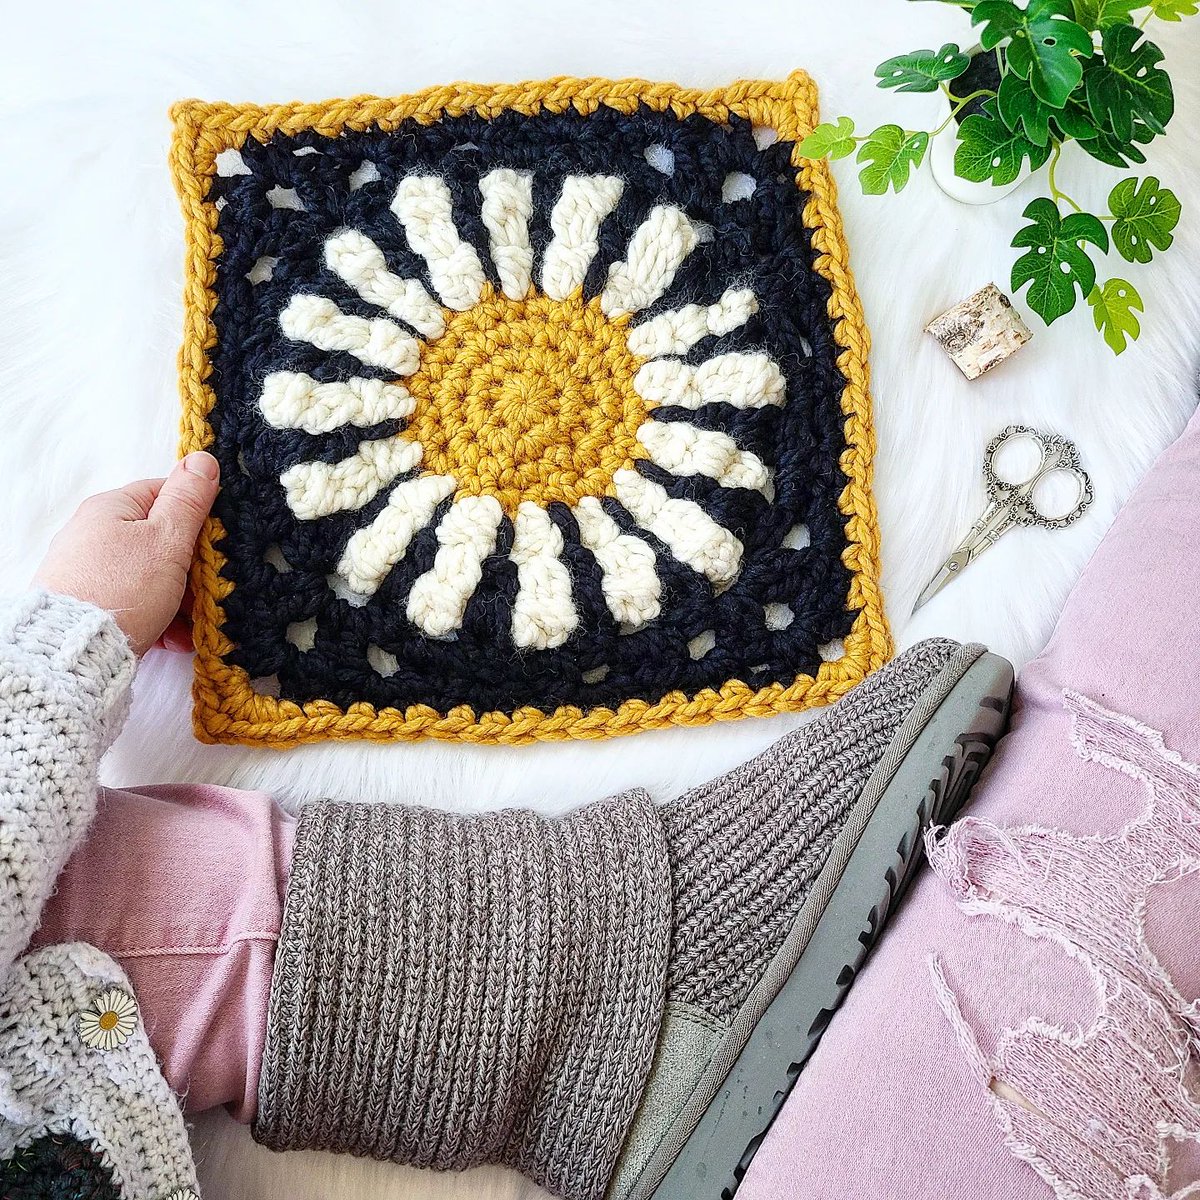 A giant size daisy granny square will always brighten up our day! 🌼
.
Wool-Ease® Thick & Quick® Yarn: ow.ly/WXf150OwU3h
📸 craftseverywhere (IG)
.
#crochet #crohetgrannysquare #crochetdaisy #crochetallday #crochetlove #handmade #diy